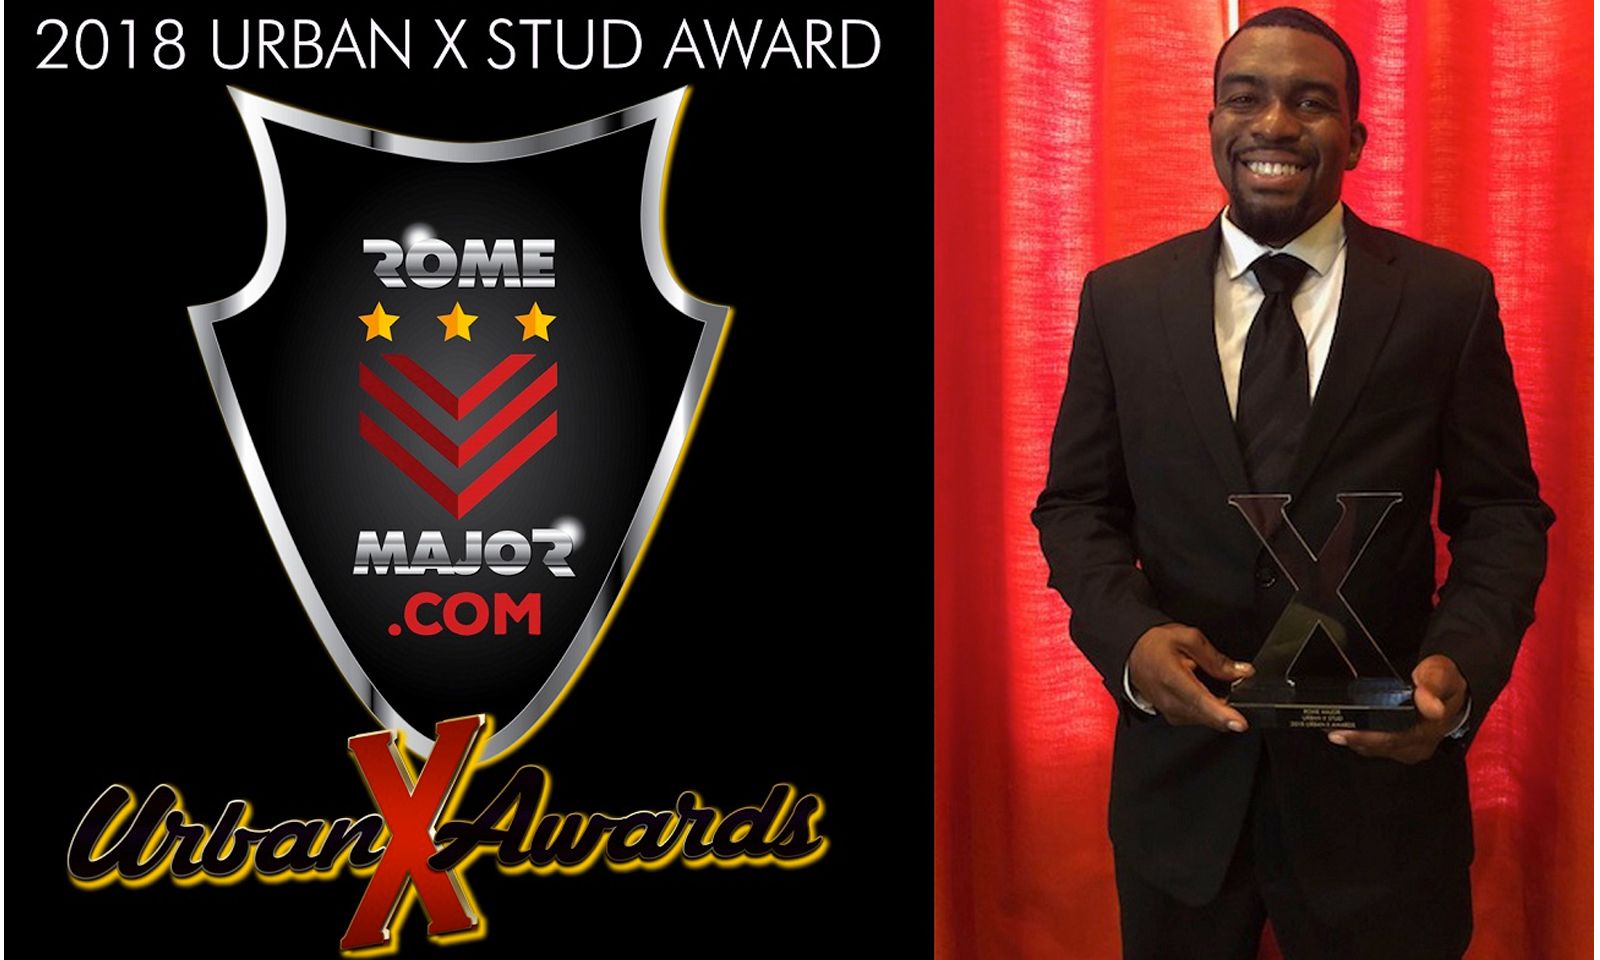 Rome Major Takes Home Urban X Award For Stud of the Year